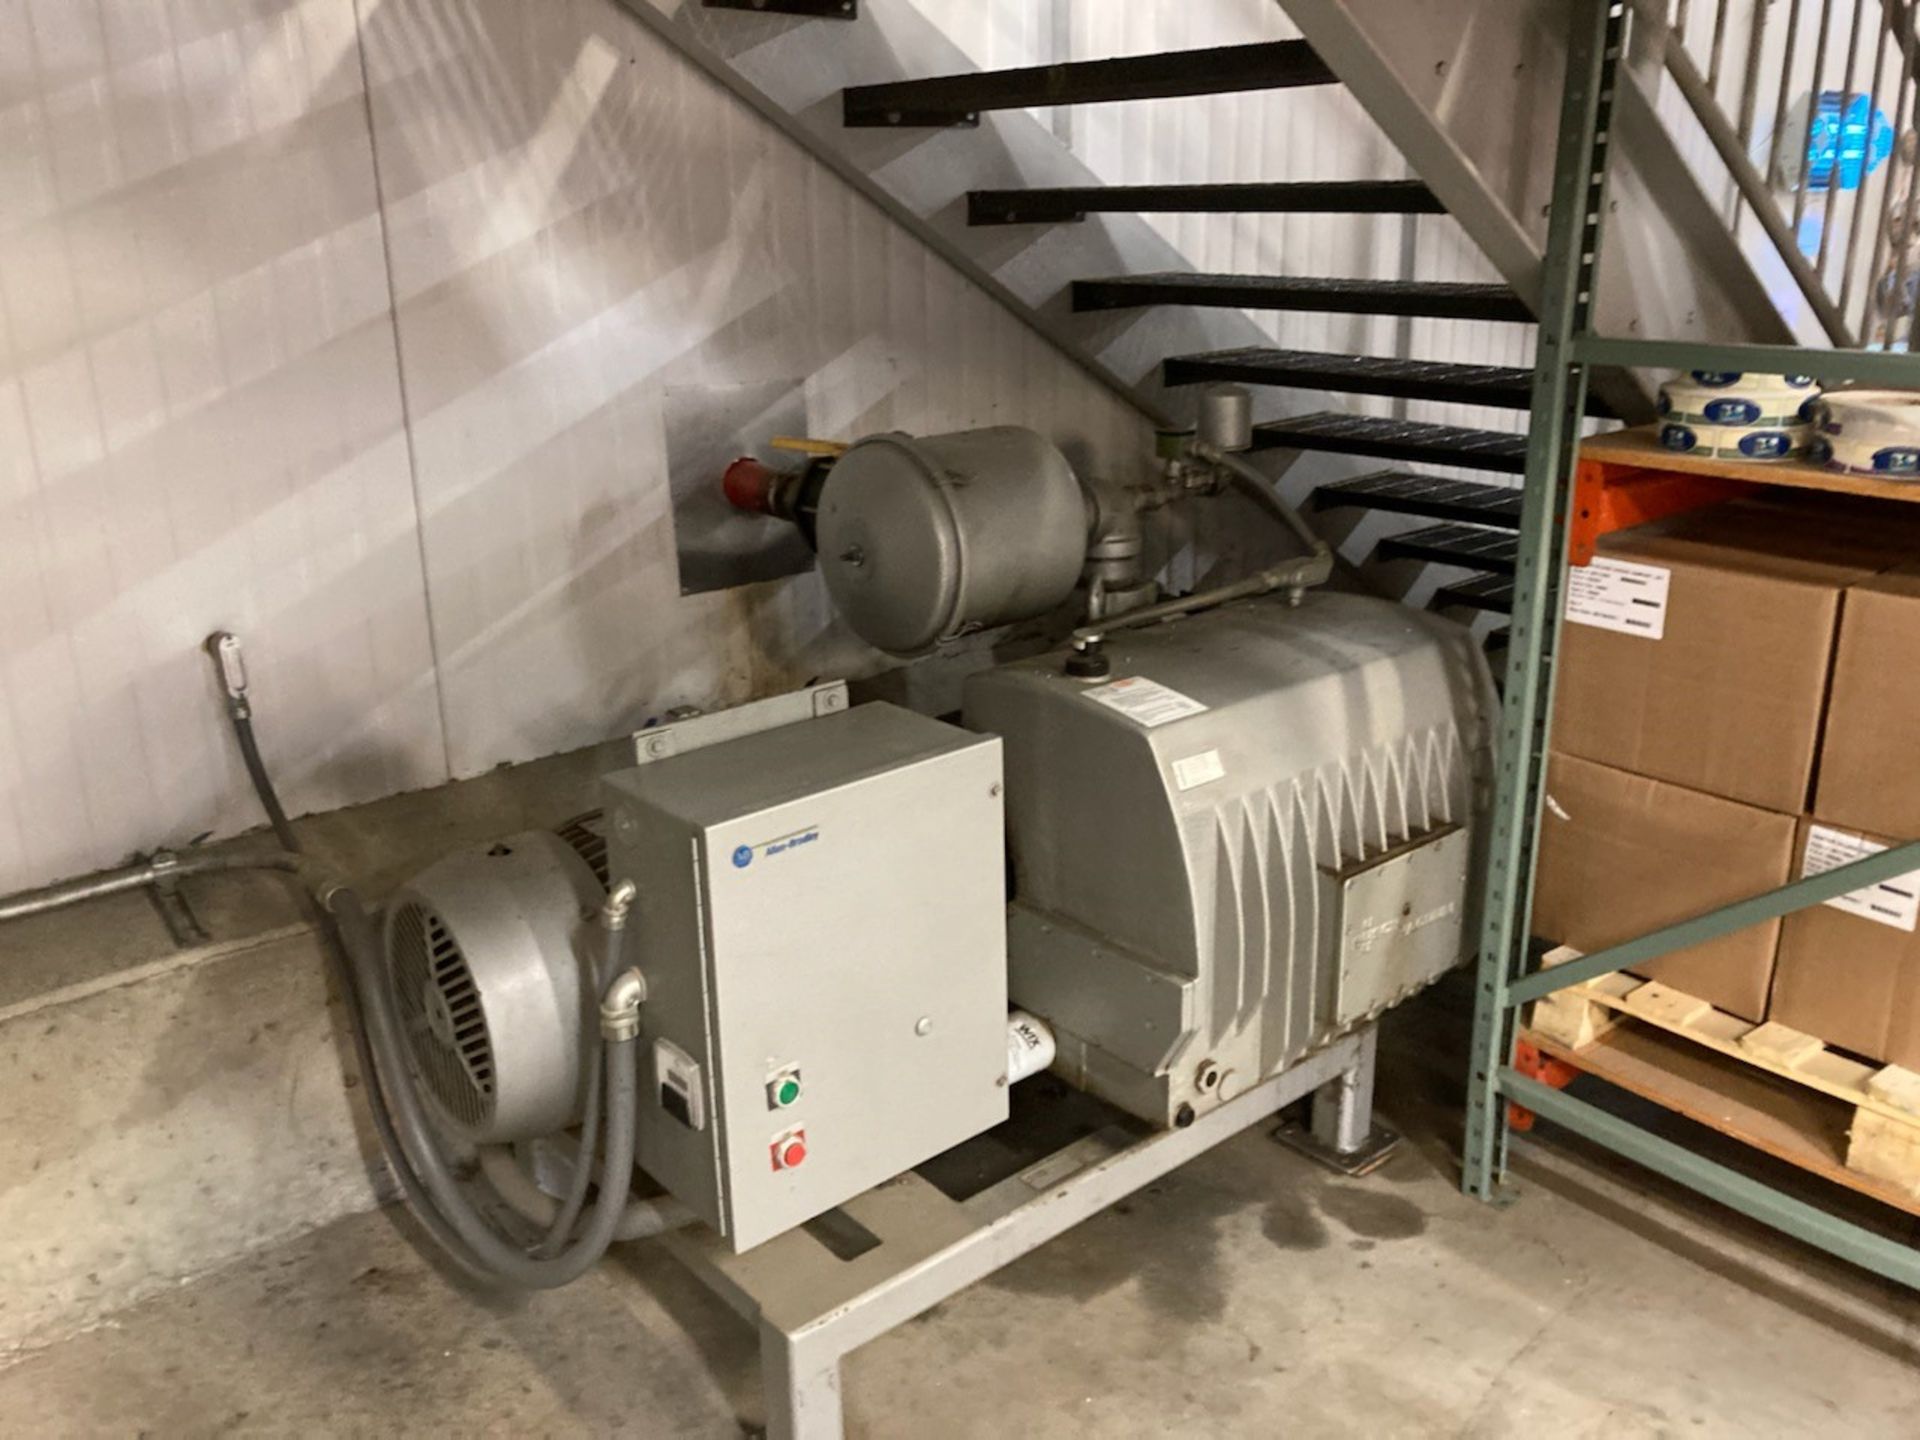 Cryovac Old Rivers Rotary Vacuum Chamber Sealer Model 8610T-14E : SN 0723732, with Busch Vacuum Pump - Image 3 of 3